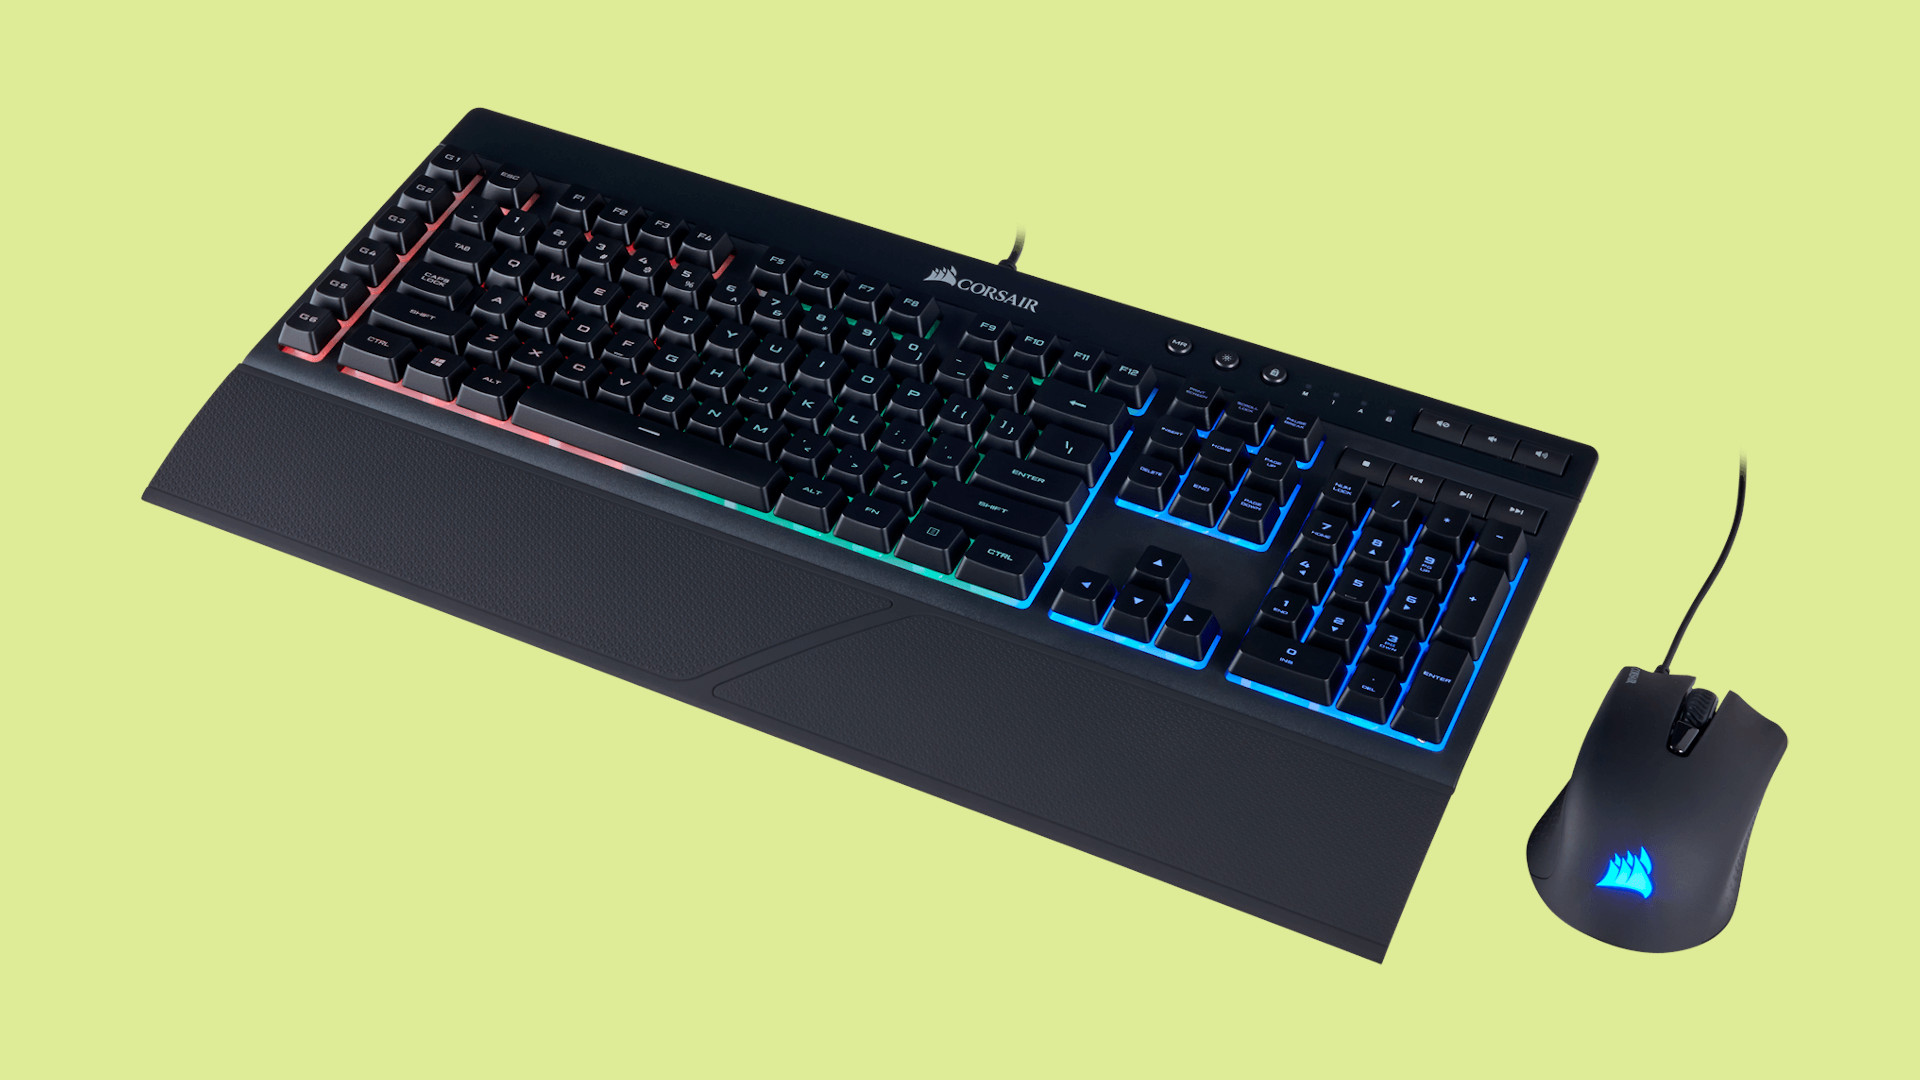 Best PS5 keyboard and mouse: A corsair keyboard and mouse 